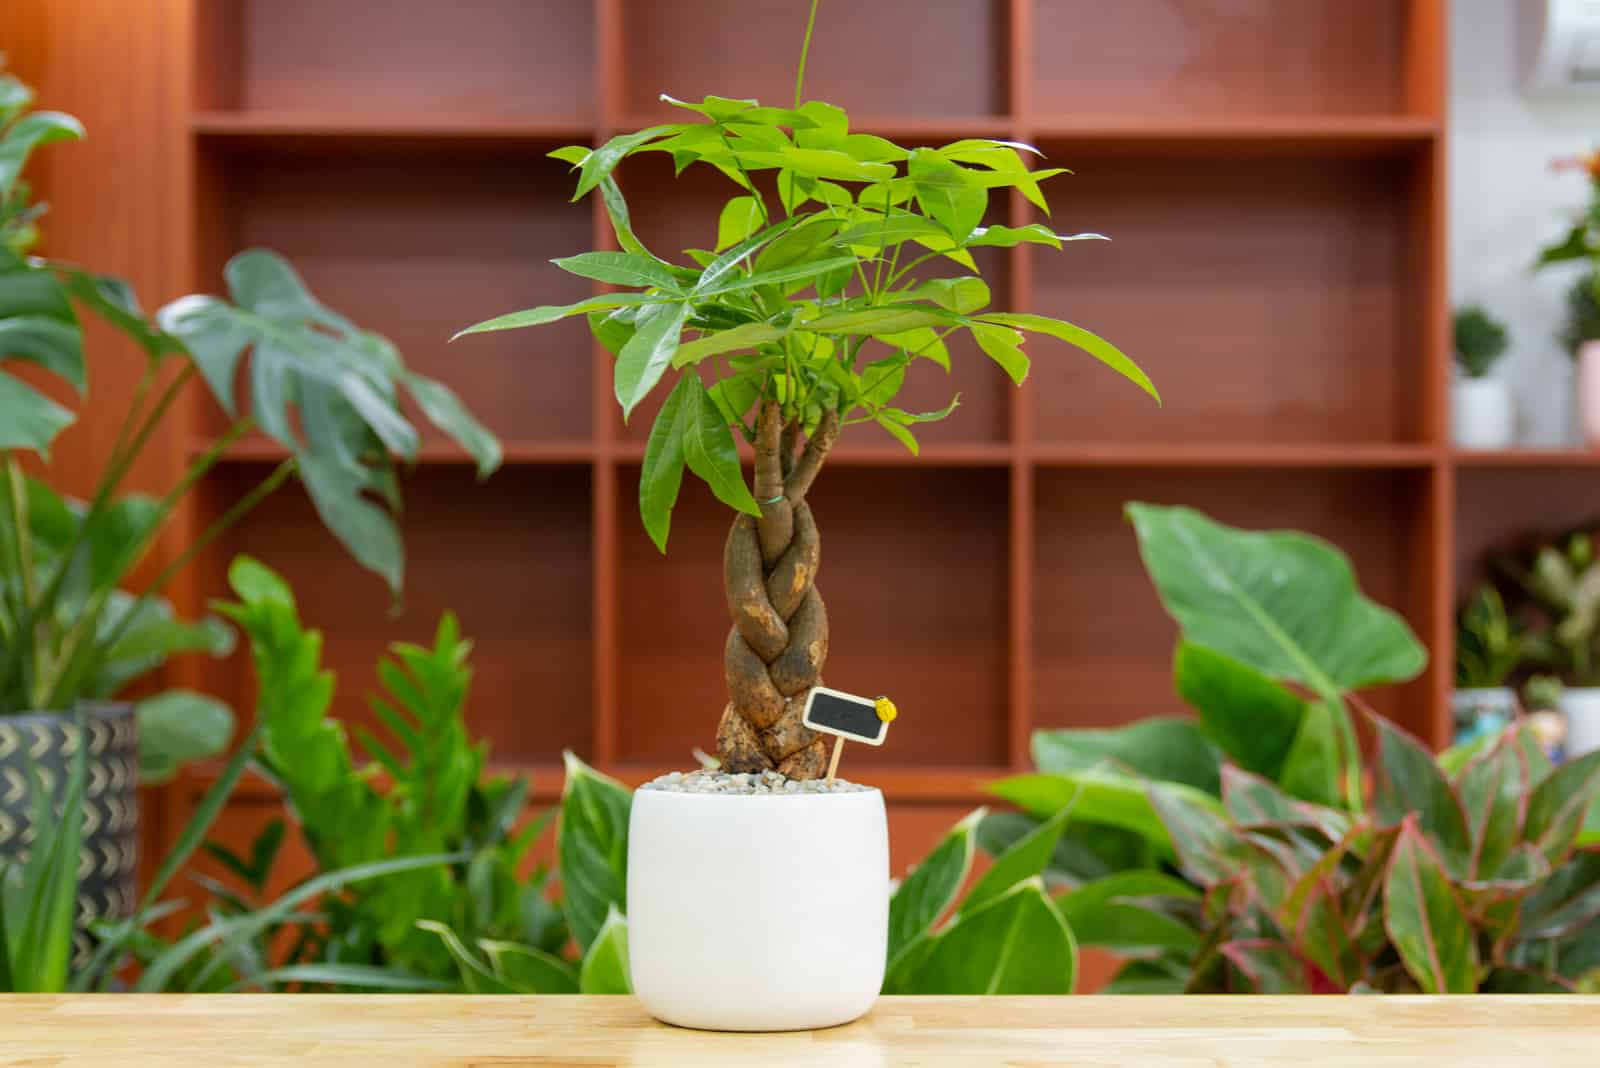 How To Braid A Money Tree Plant: Step-by-step Guide